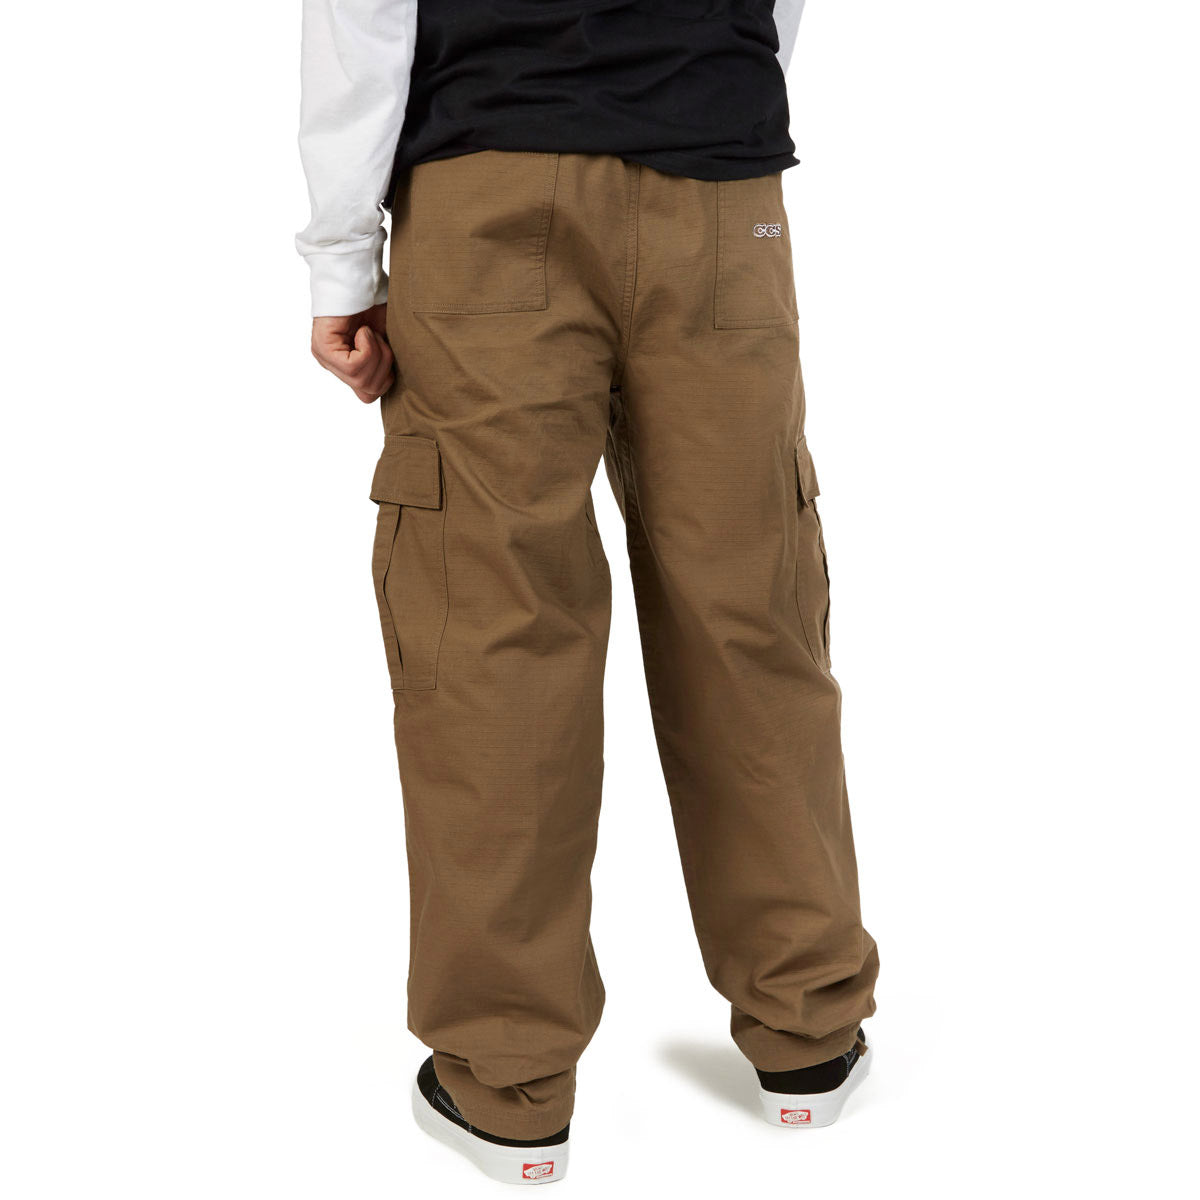 CCS Easy Ripstop Cargo Pants - Brown image 4